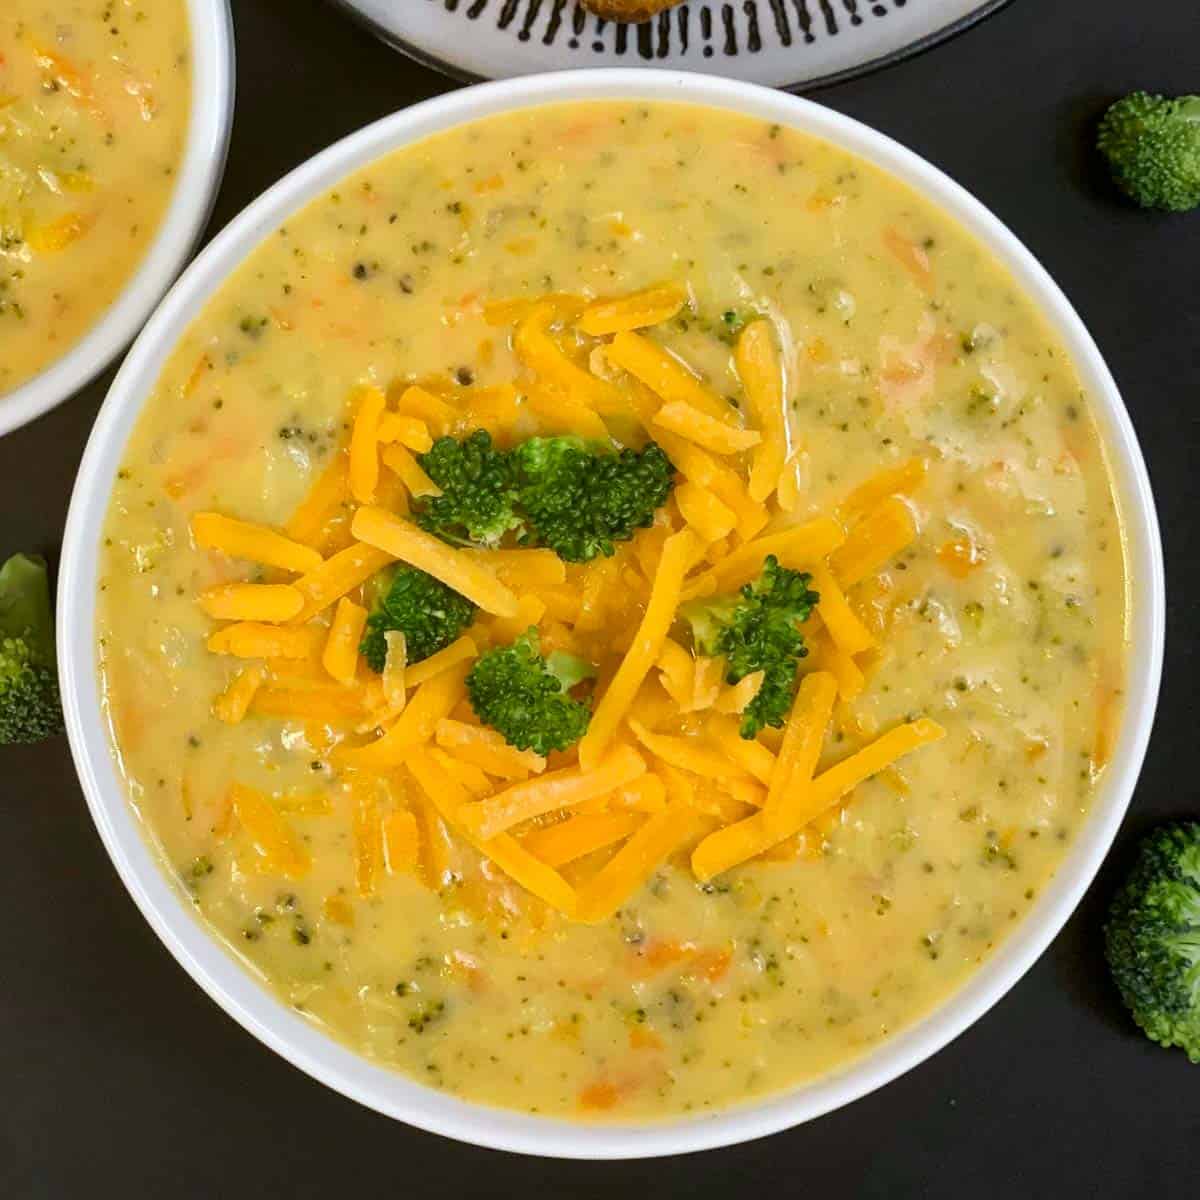 Instant Pot Broccoli Cheddar Cheese Soup served in a bowl garnished with cheddar soup and broccoli